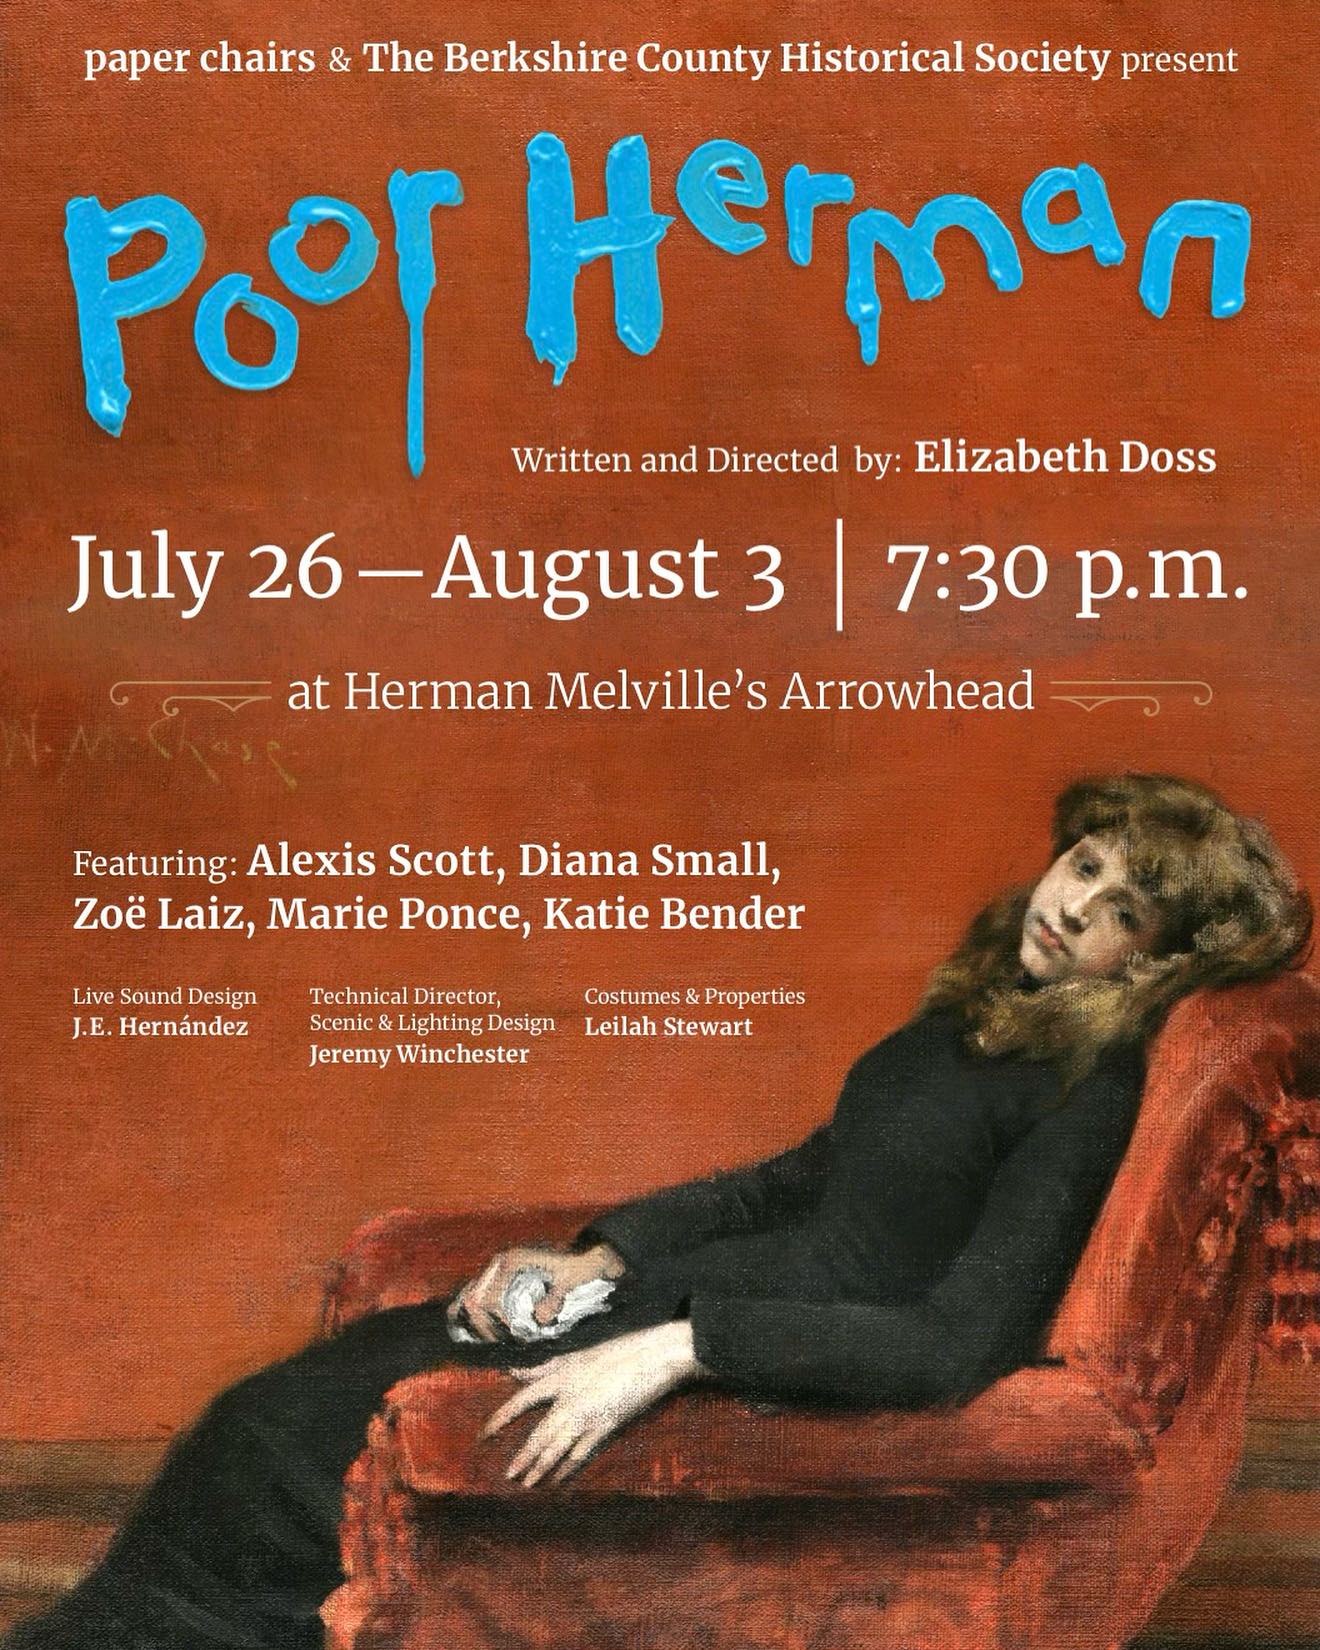 paper chairs and The Berkshire County Historical Society present "Poor Herman"